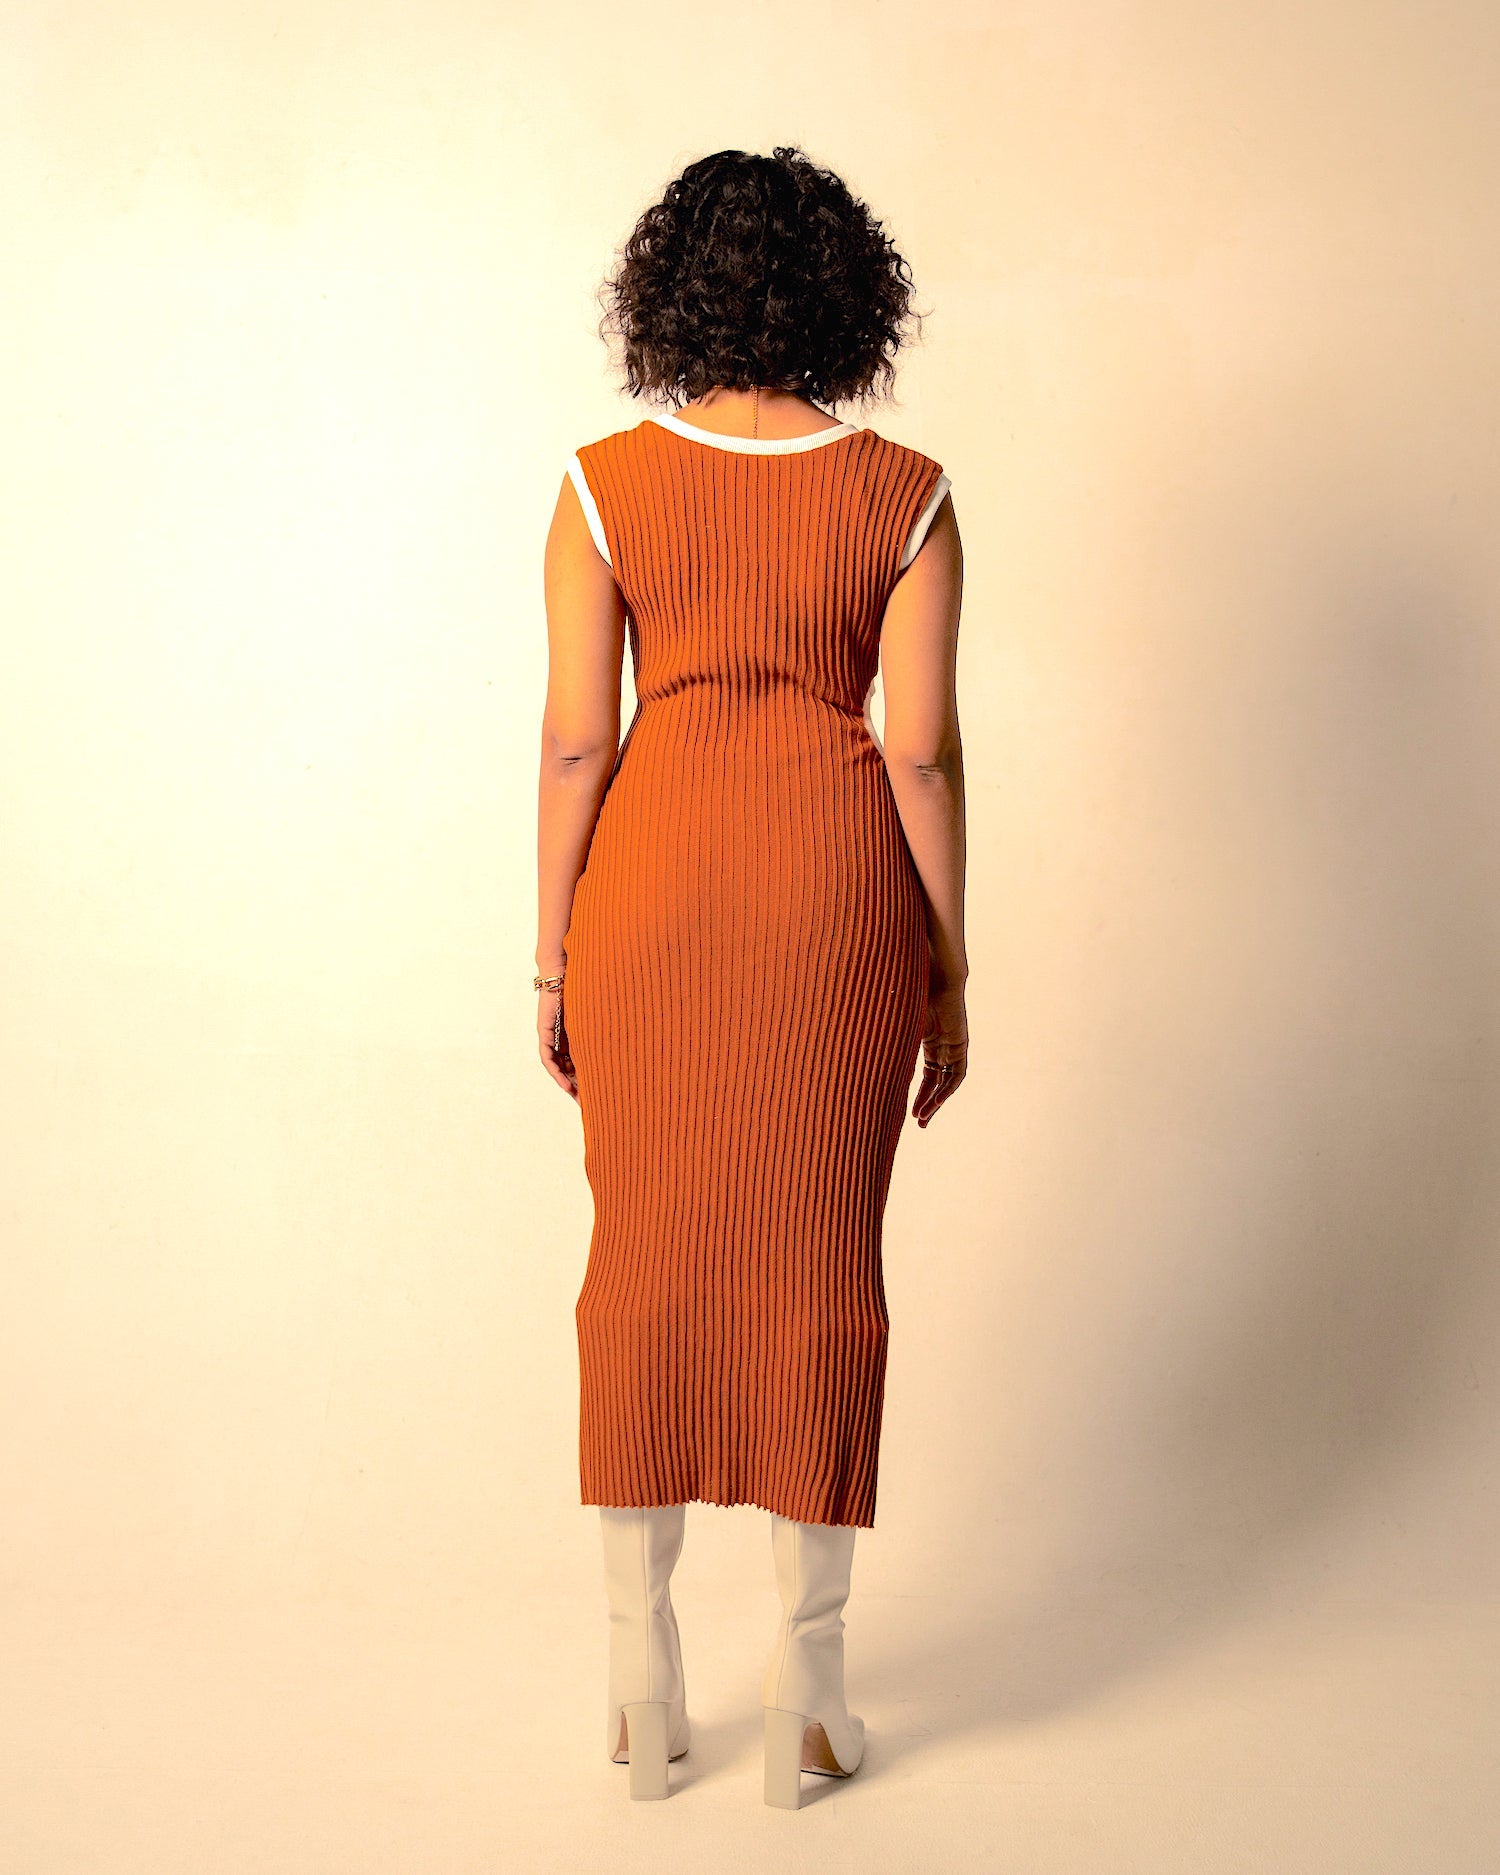 Orange Midi Dress at Kamakhyaa by Meko Studio. This item is Cut Out Dresses, Evening Wear, Hand Knitted, July Sale, July Sale 2023, Midi Dresses, Orange, Recycled Cotton, Recycled Polyster, Sleeveless Dresses, Slim Fit, Solids, Tranquil AW-22/23, Womenswear